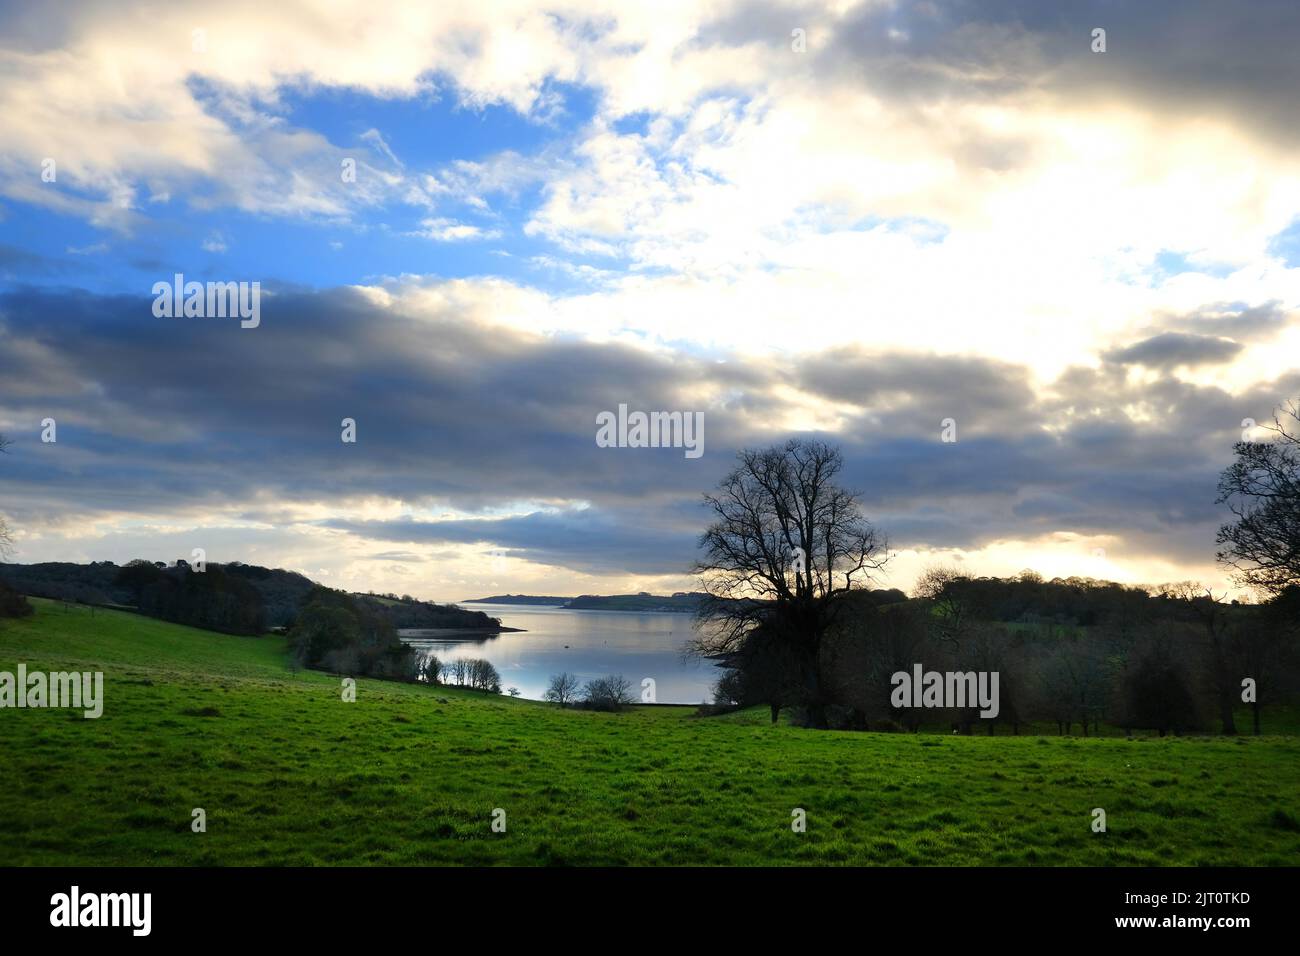 Looking down towards the River Fal and the Carrick Roads, Cornwall, UK - John Gollop Stock Photo